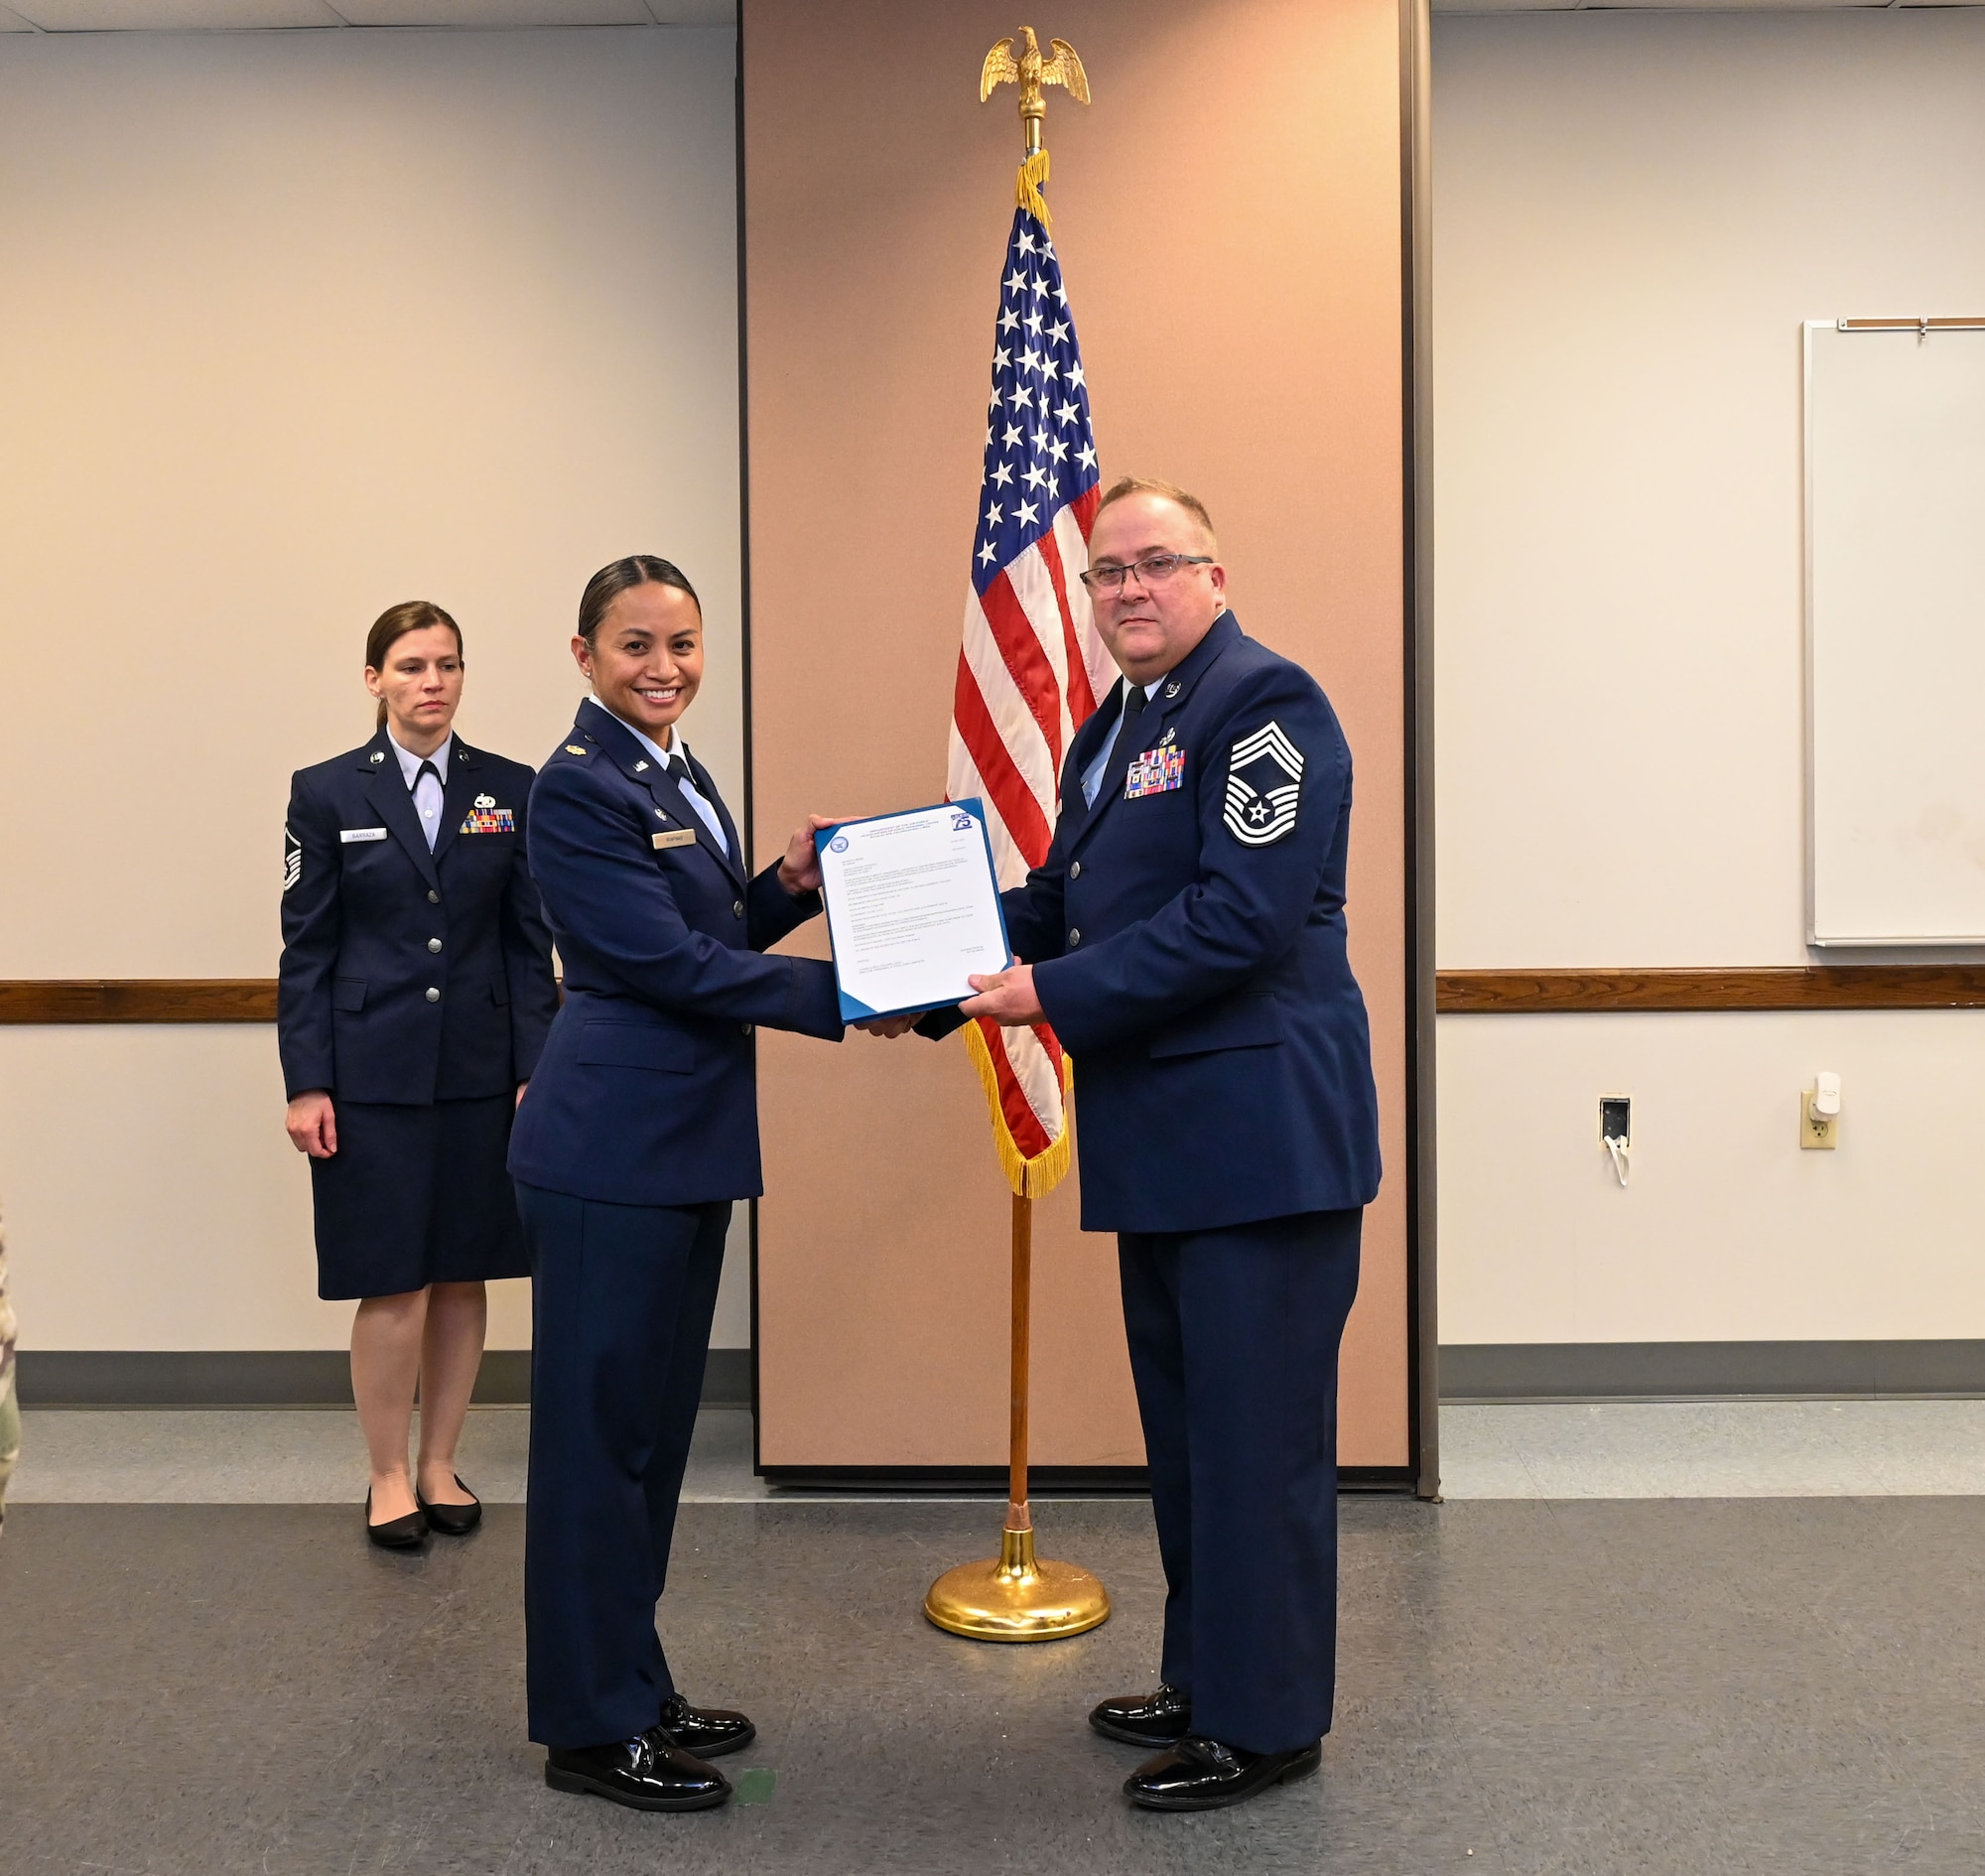 Maj. Valerie A. Mafnas, 74th Aerial Port Squadron commander, presents a certificate of retirement to Chief Master Sgt. Steven Purvis, 74th APS superintendent, during a ceremony at the 74th APS building San Antonio, Texas, Jan. 6, 2024. Purvis began his Air Force career in 1991 as an equipment management clerk with the 351st Supply Squadron at Whiteman AFB, Missouri and retired with more than 30 years of military service. (U.S. Air Force photo by Staff Sgt. Adriana Barrientos)